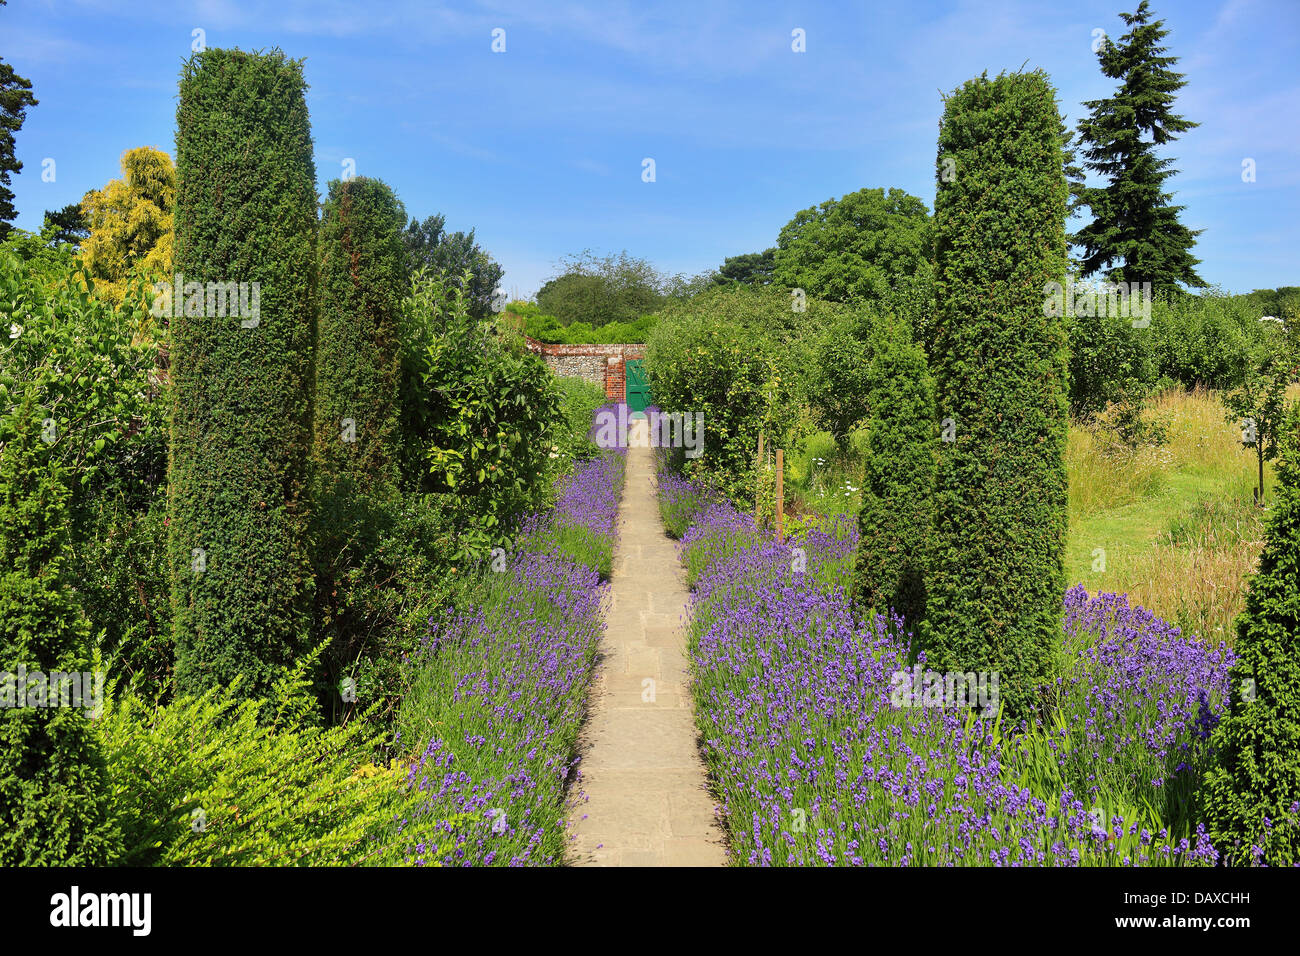 An English walled garden with a lavender lined path leading to a gate Stock Photo